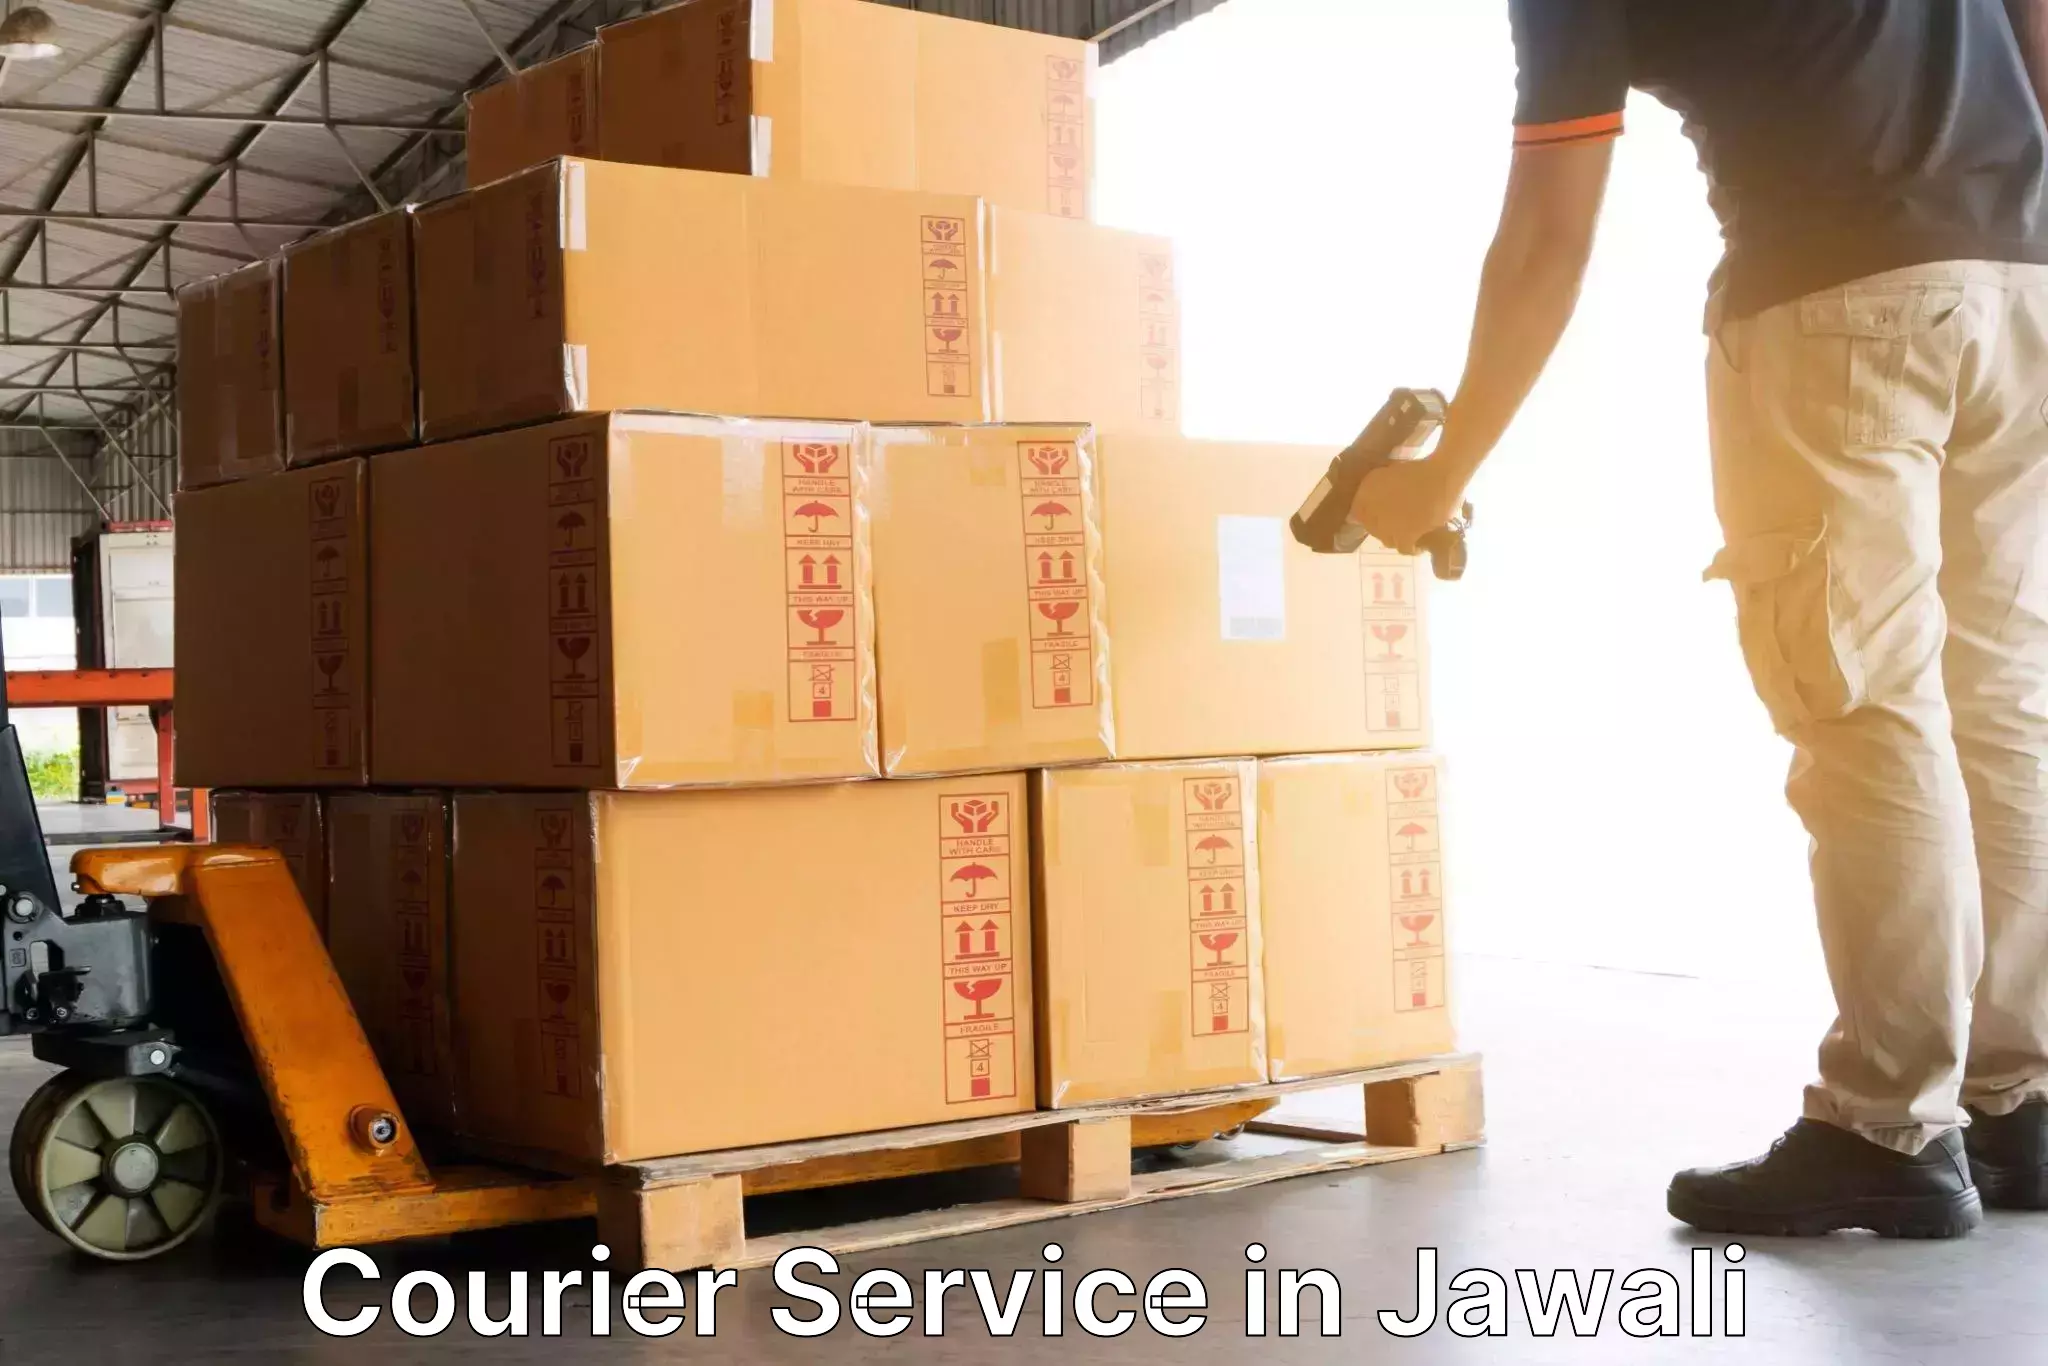 Nationwide delivery network in Jawali